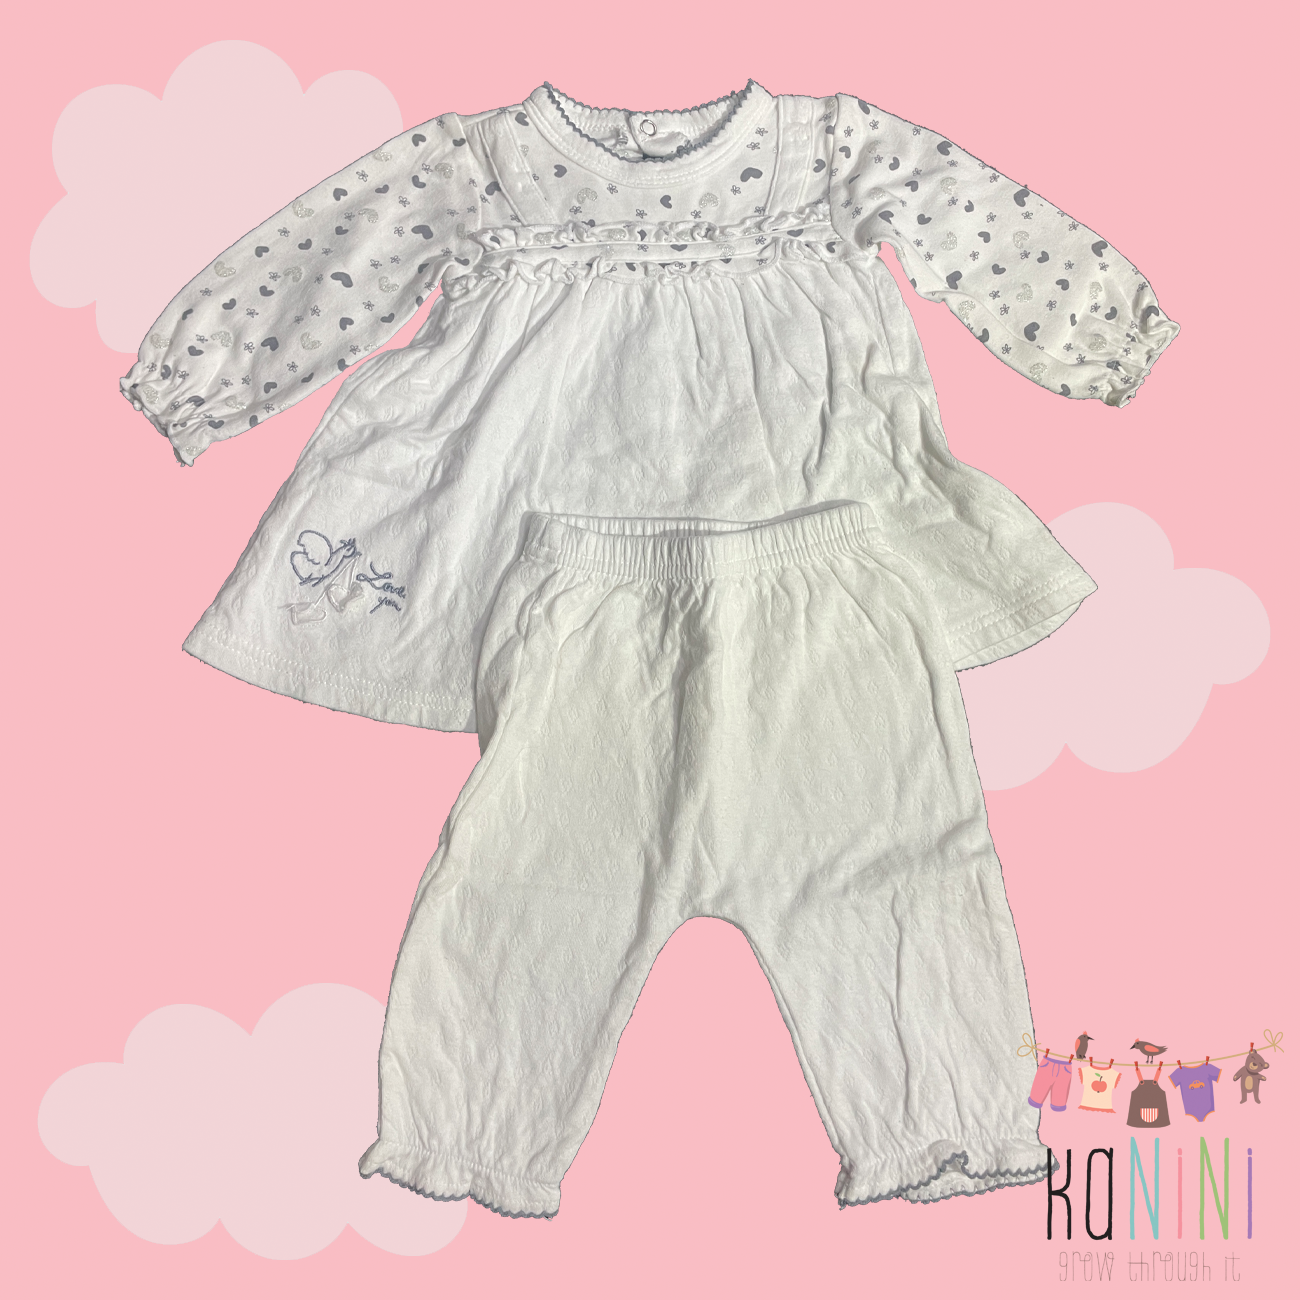 Featured image for “Woolworths 3 - 6 Months Girls Dress Set”